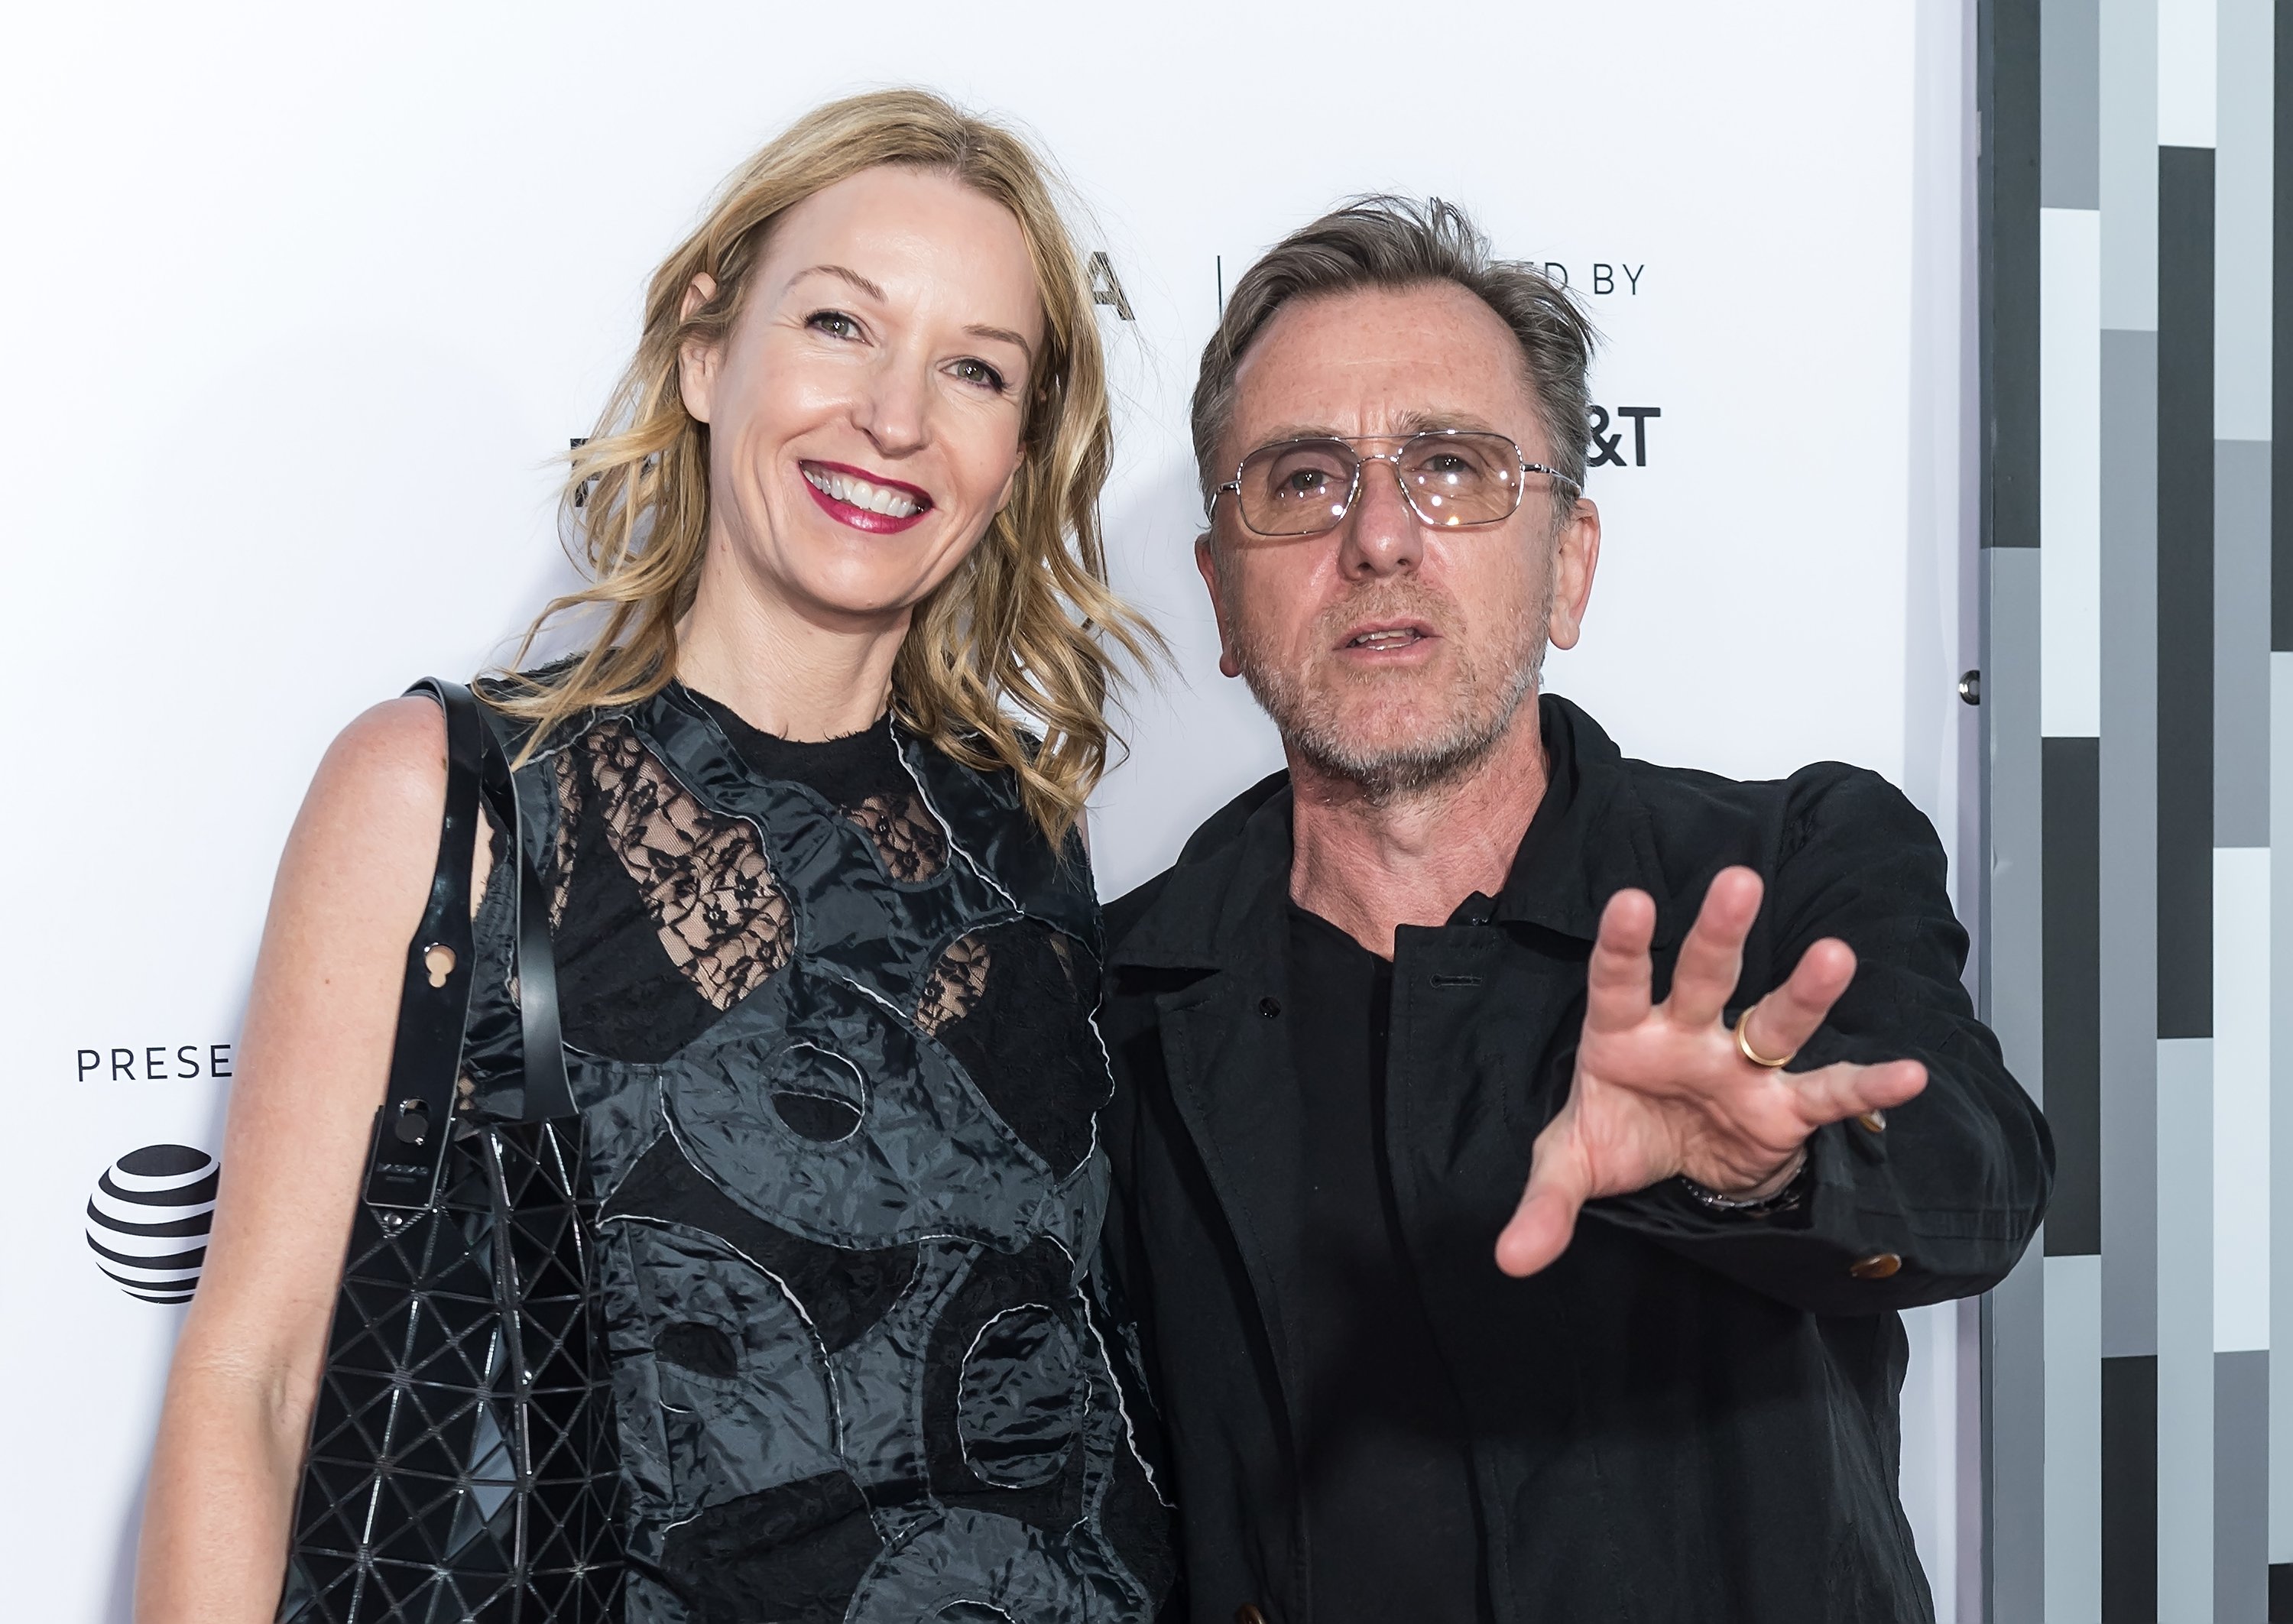 Tim Roth (R) and his wife Nikki Butler attend 'Reservoir Dogs' 25th Anniversary Screening during 2017 Tribeca Film Festival at The Beacon Theatre on April 28, 2017 in New York City. | Source: Getty Images